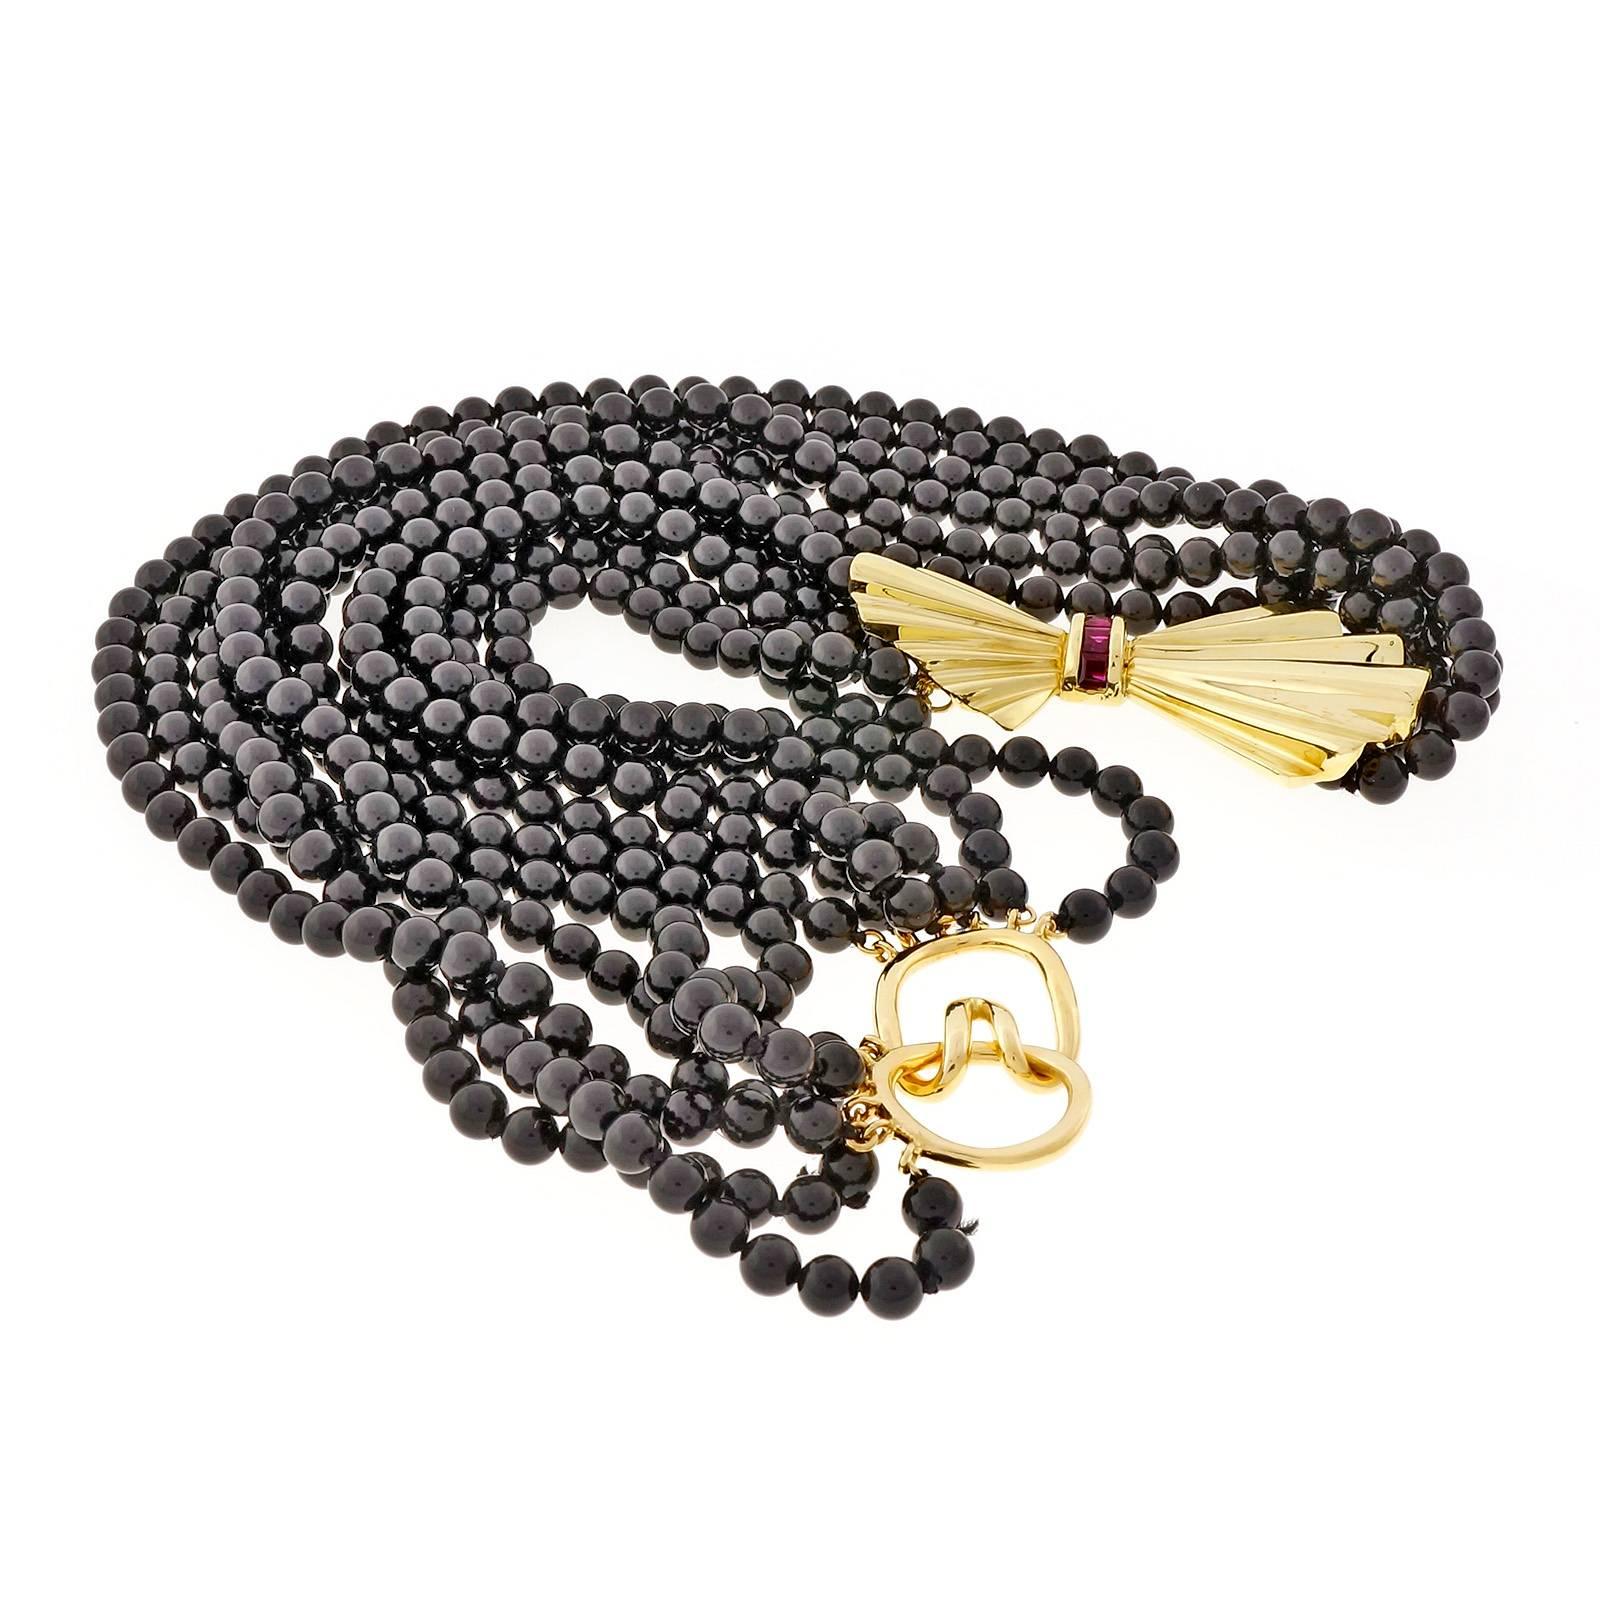 Tiffany & Co 18k yellow gold Ruby 6 row black Onyx bead necklace, circa 1960-1970. 18k clasp. Can be twisted if desired. 17.5 inches

4 square bright red Rubies, approx. total weight 1.20cts, 3mm
510 black Onyx beads, 4.5mm
18k yellow gold
Tested